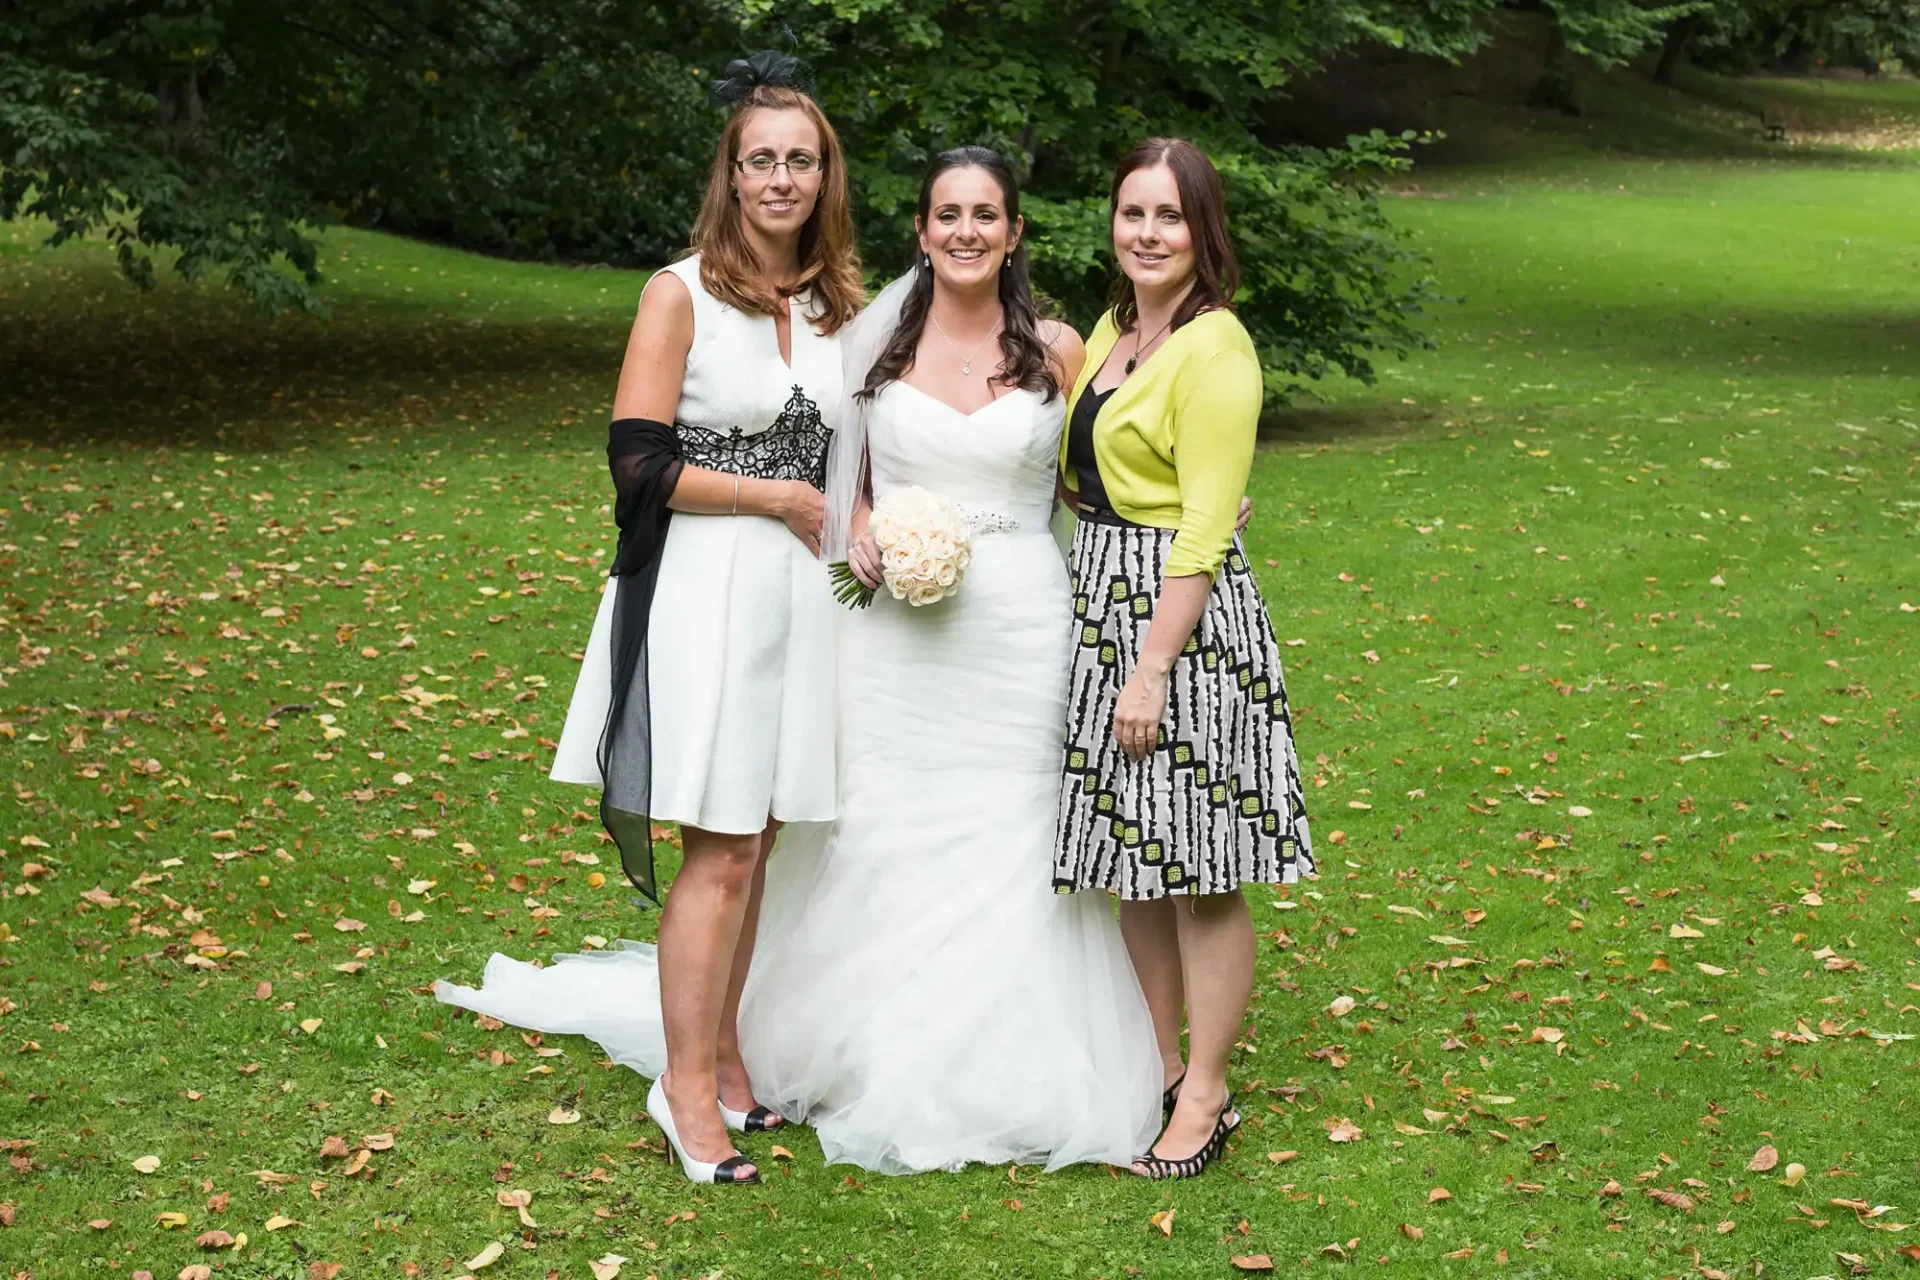 Three women smiling in a park, one in a white bridal gown flanked by two in stylish dresses, with trees and grass in the background.